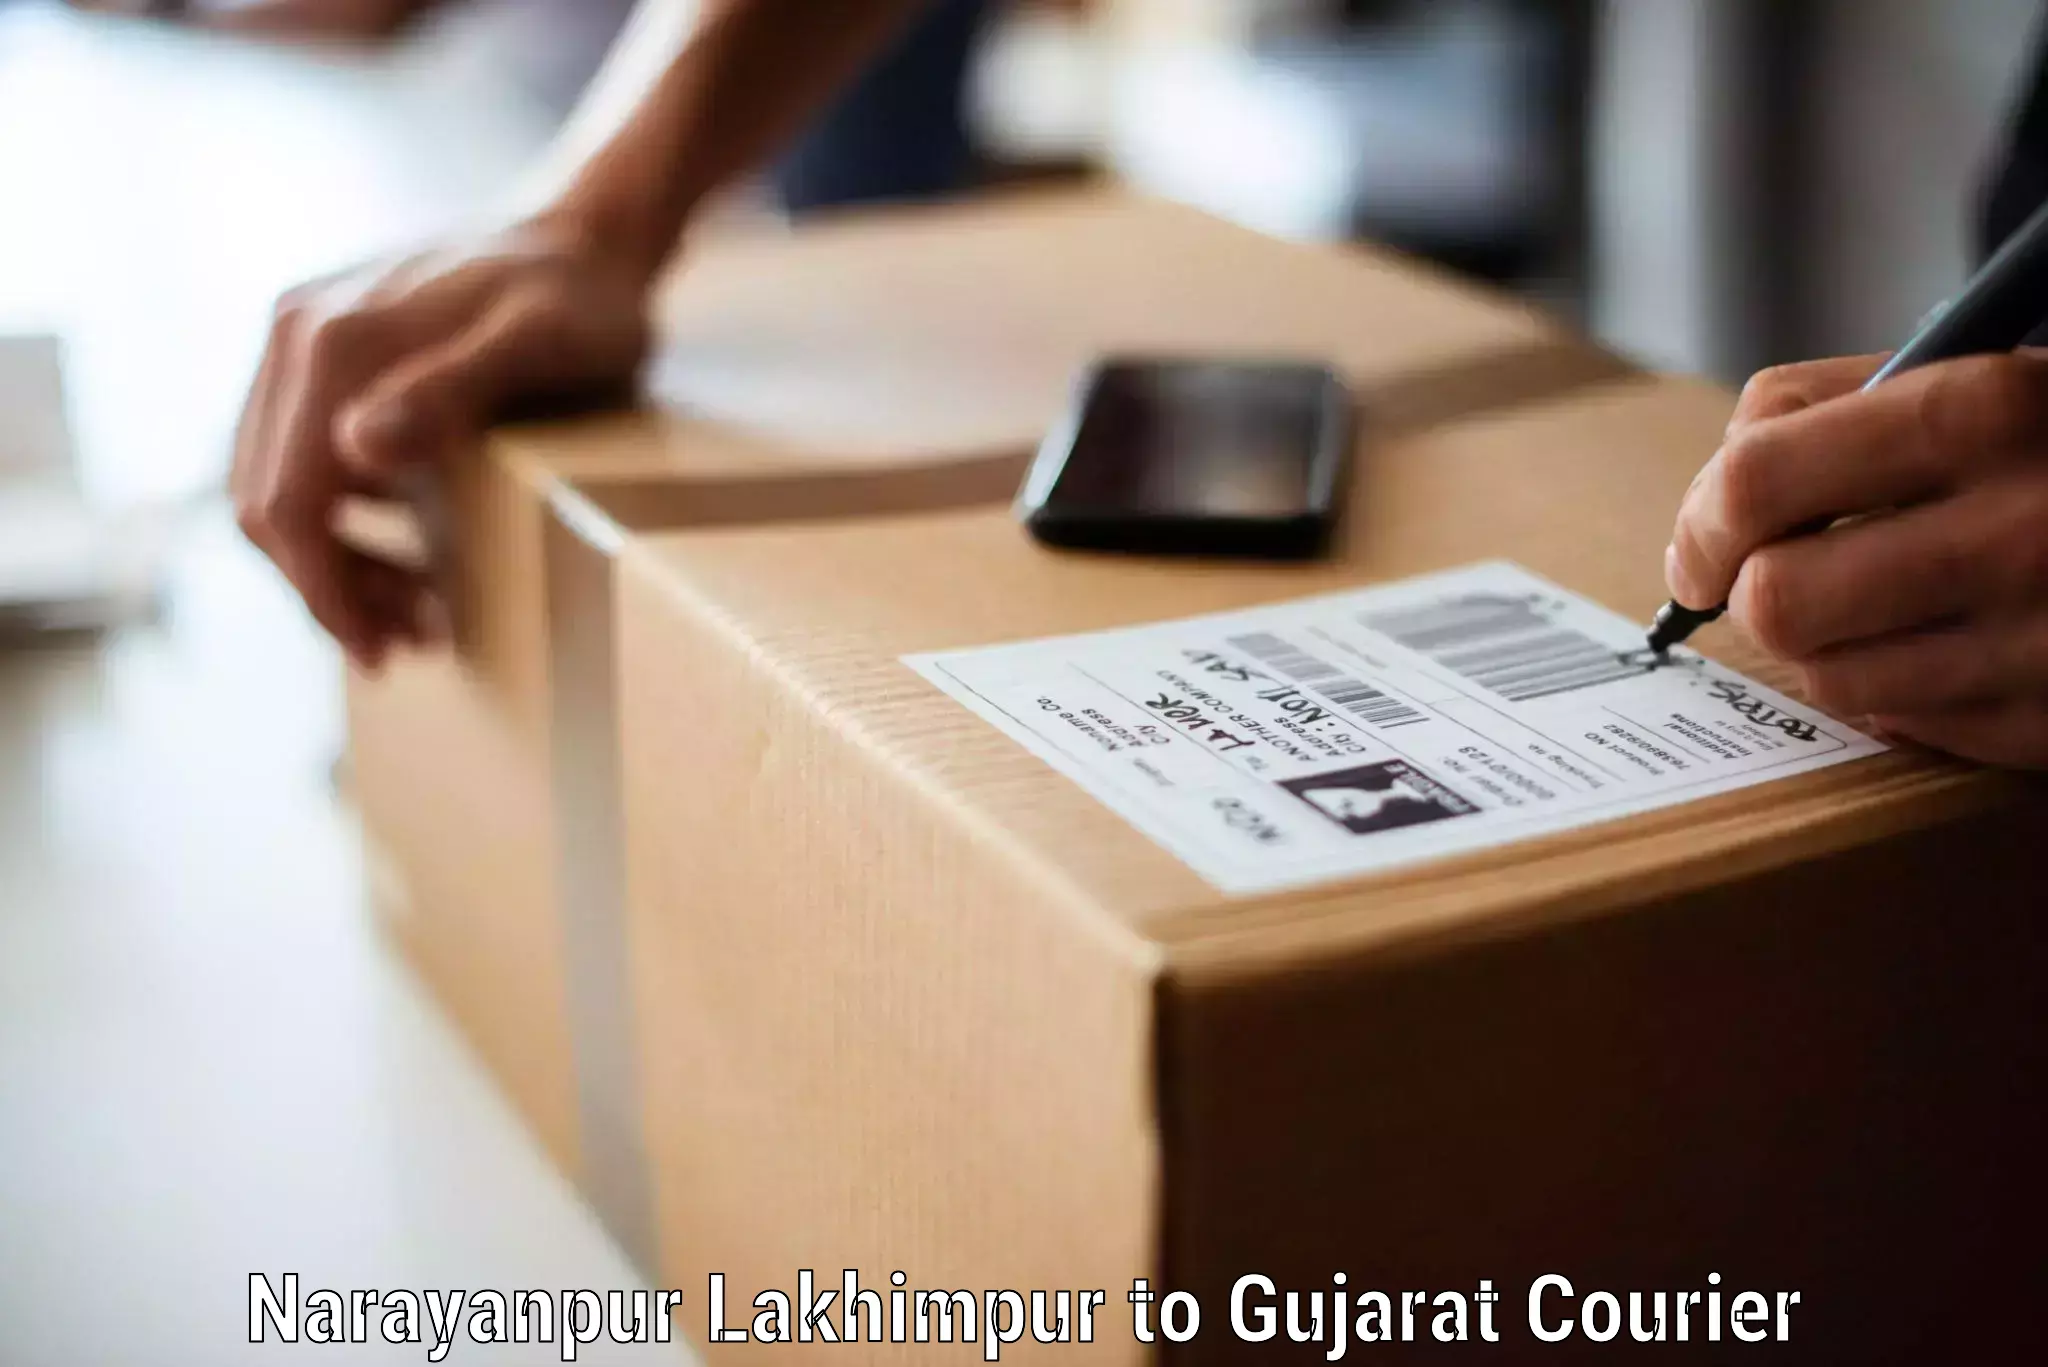 Quality relocation services Narayanpur Lakhimpur to Gujarat